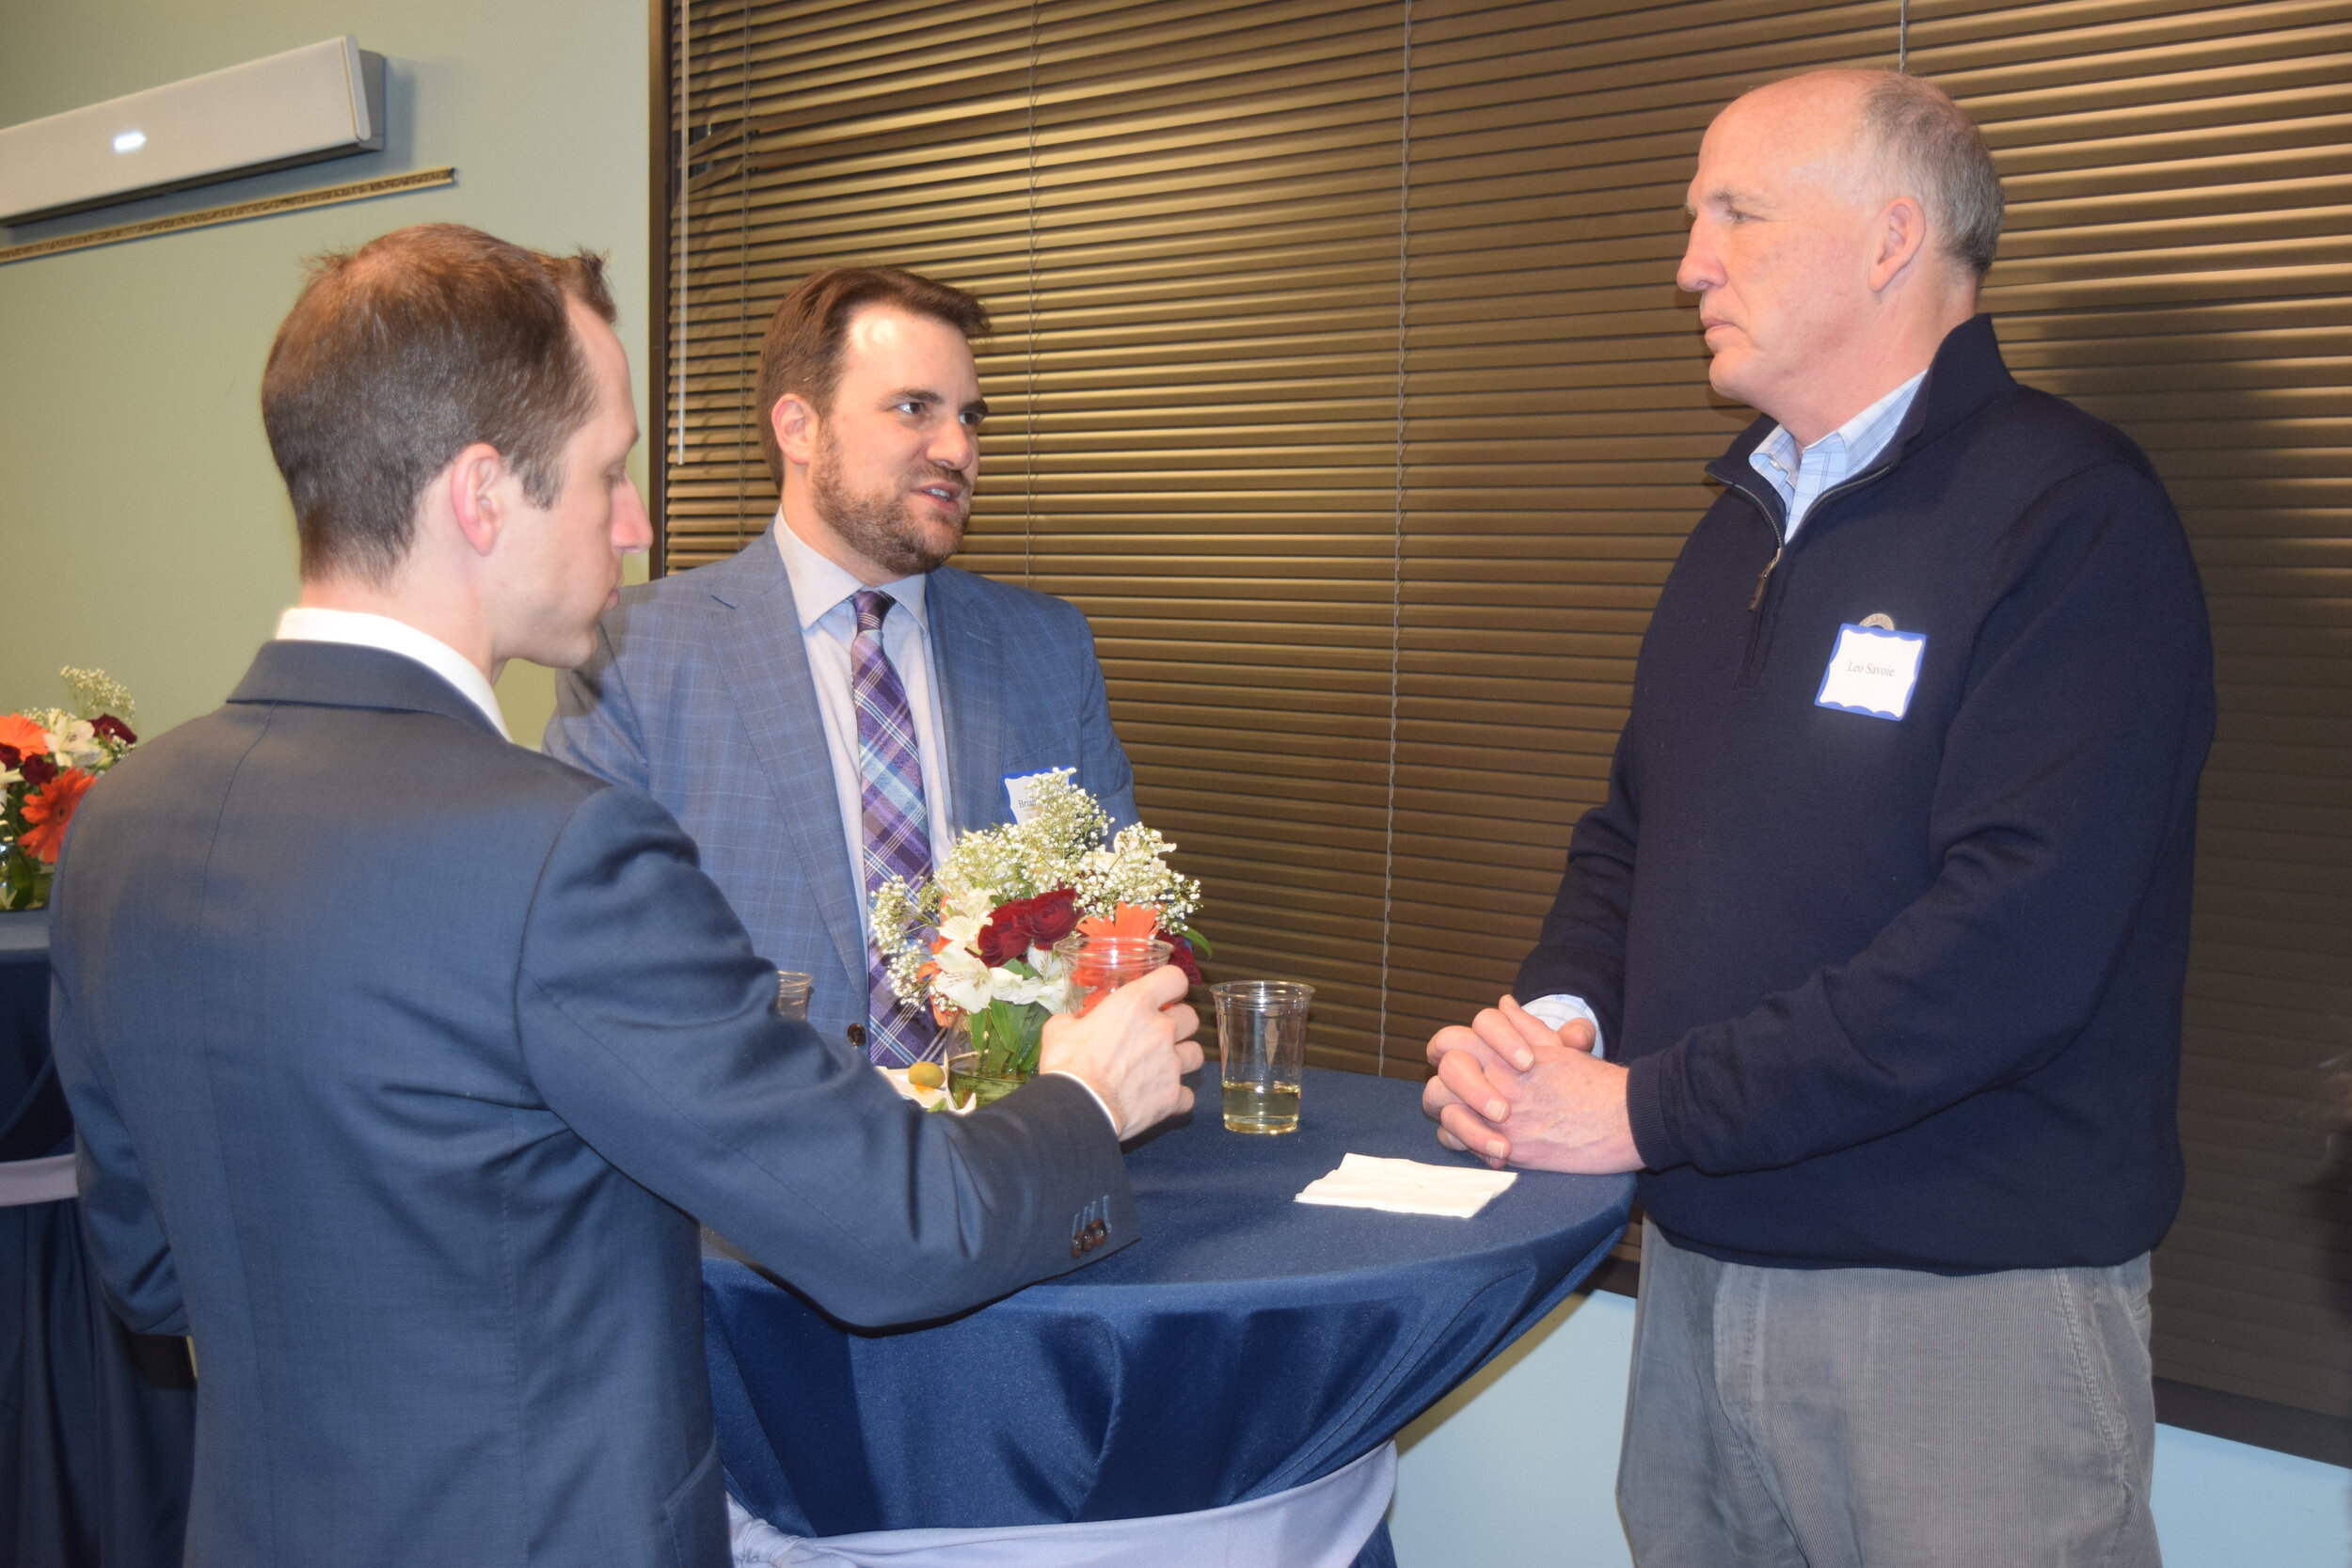 Board member Brian Newman (center) talks to guests at the event.